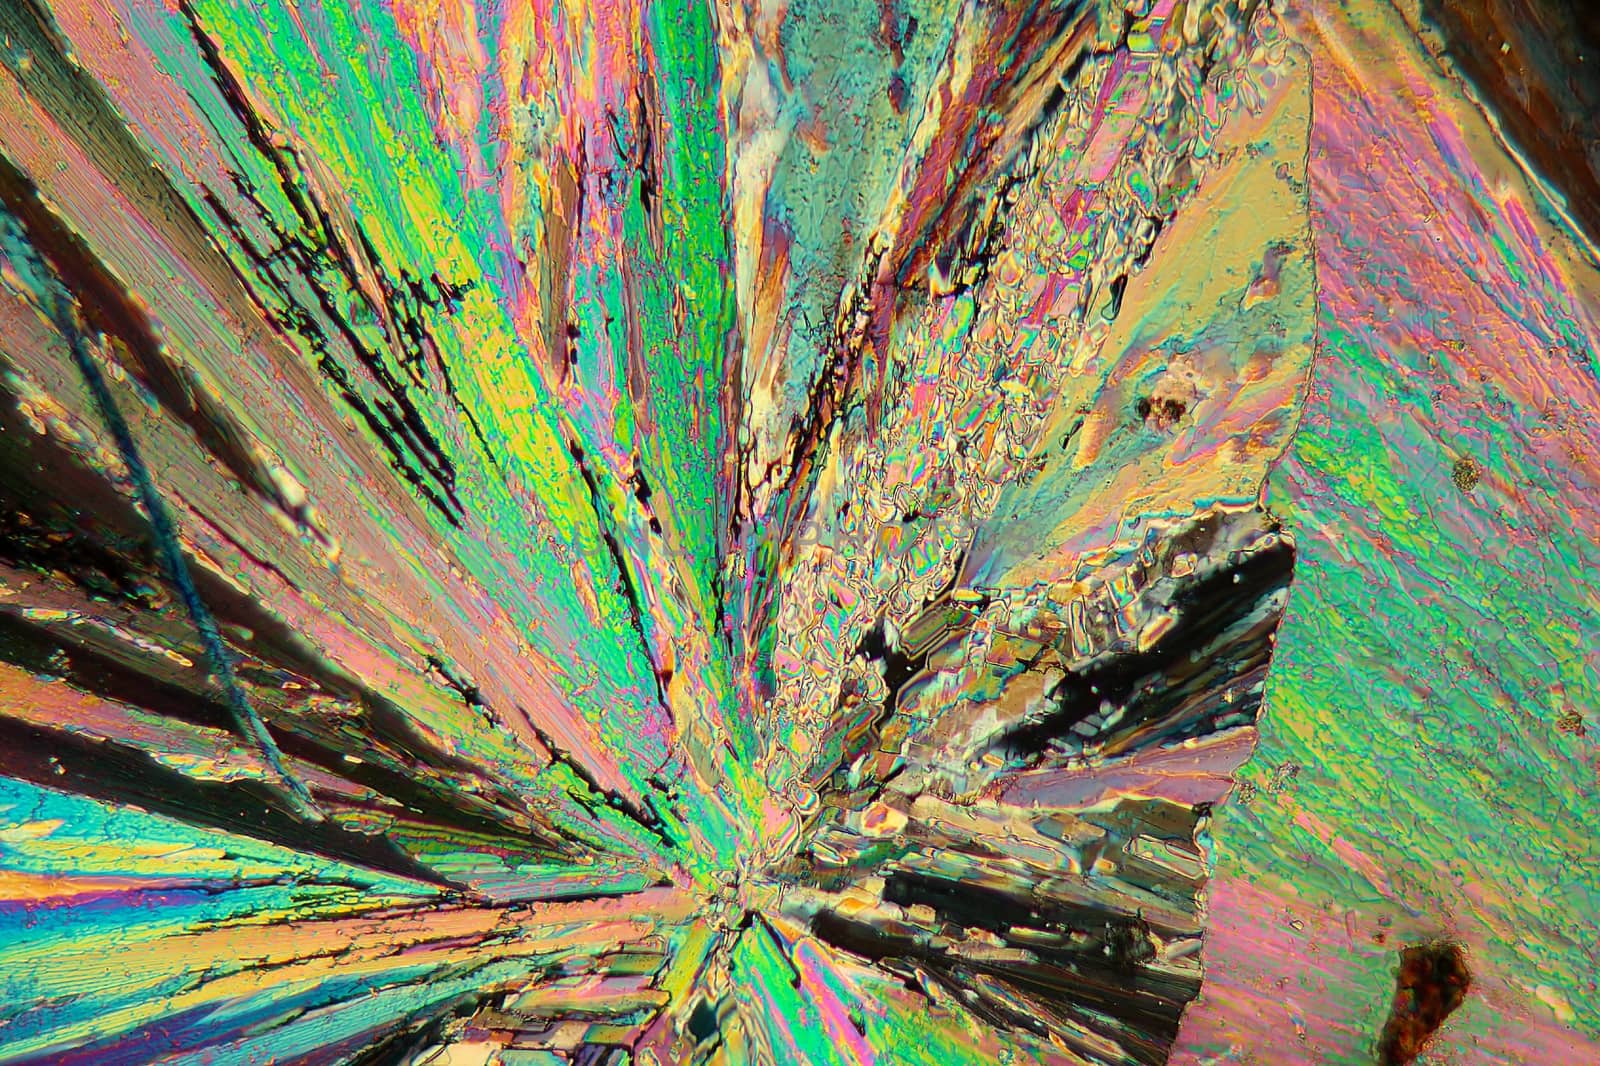 Thulium is a rare earth element. The crystals are precipitated from a solution on a microscope slide and photographed in polarized light.